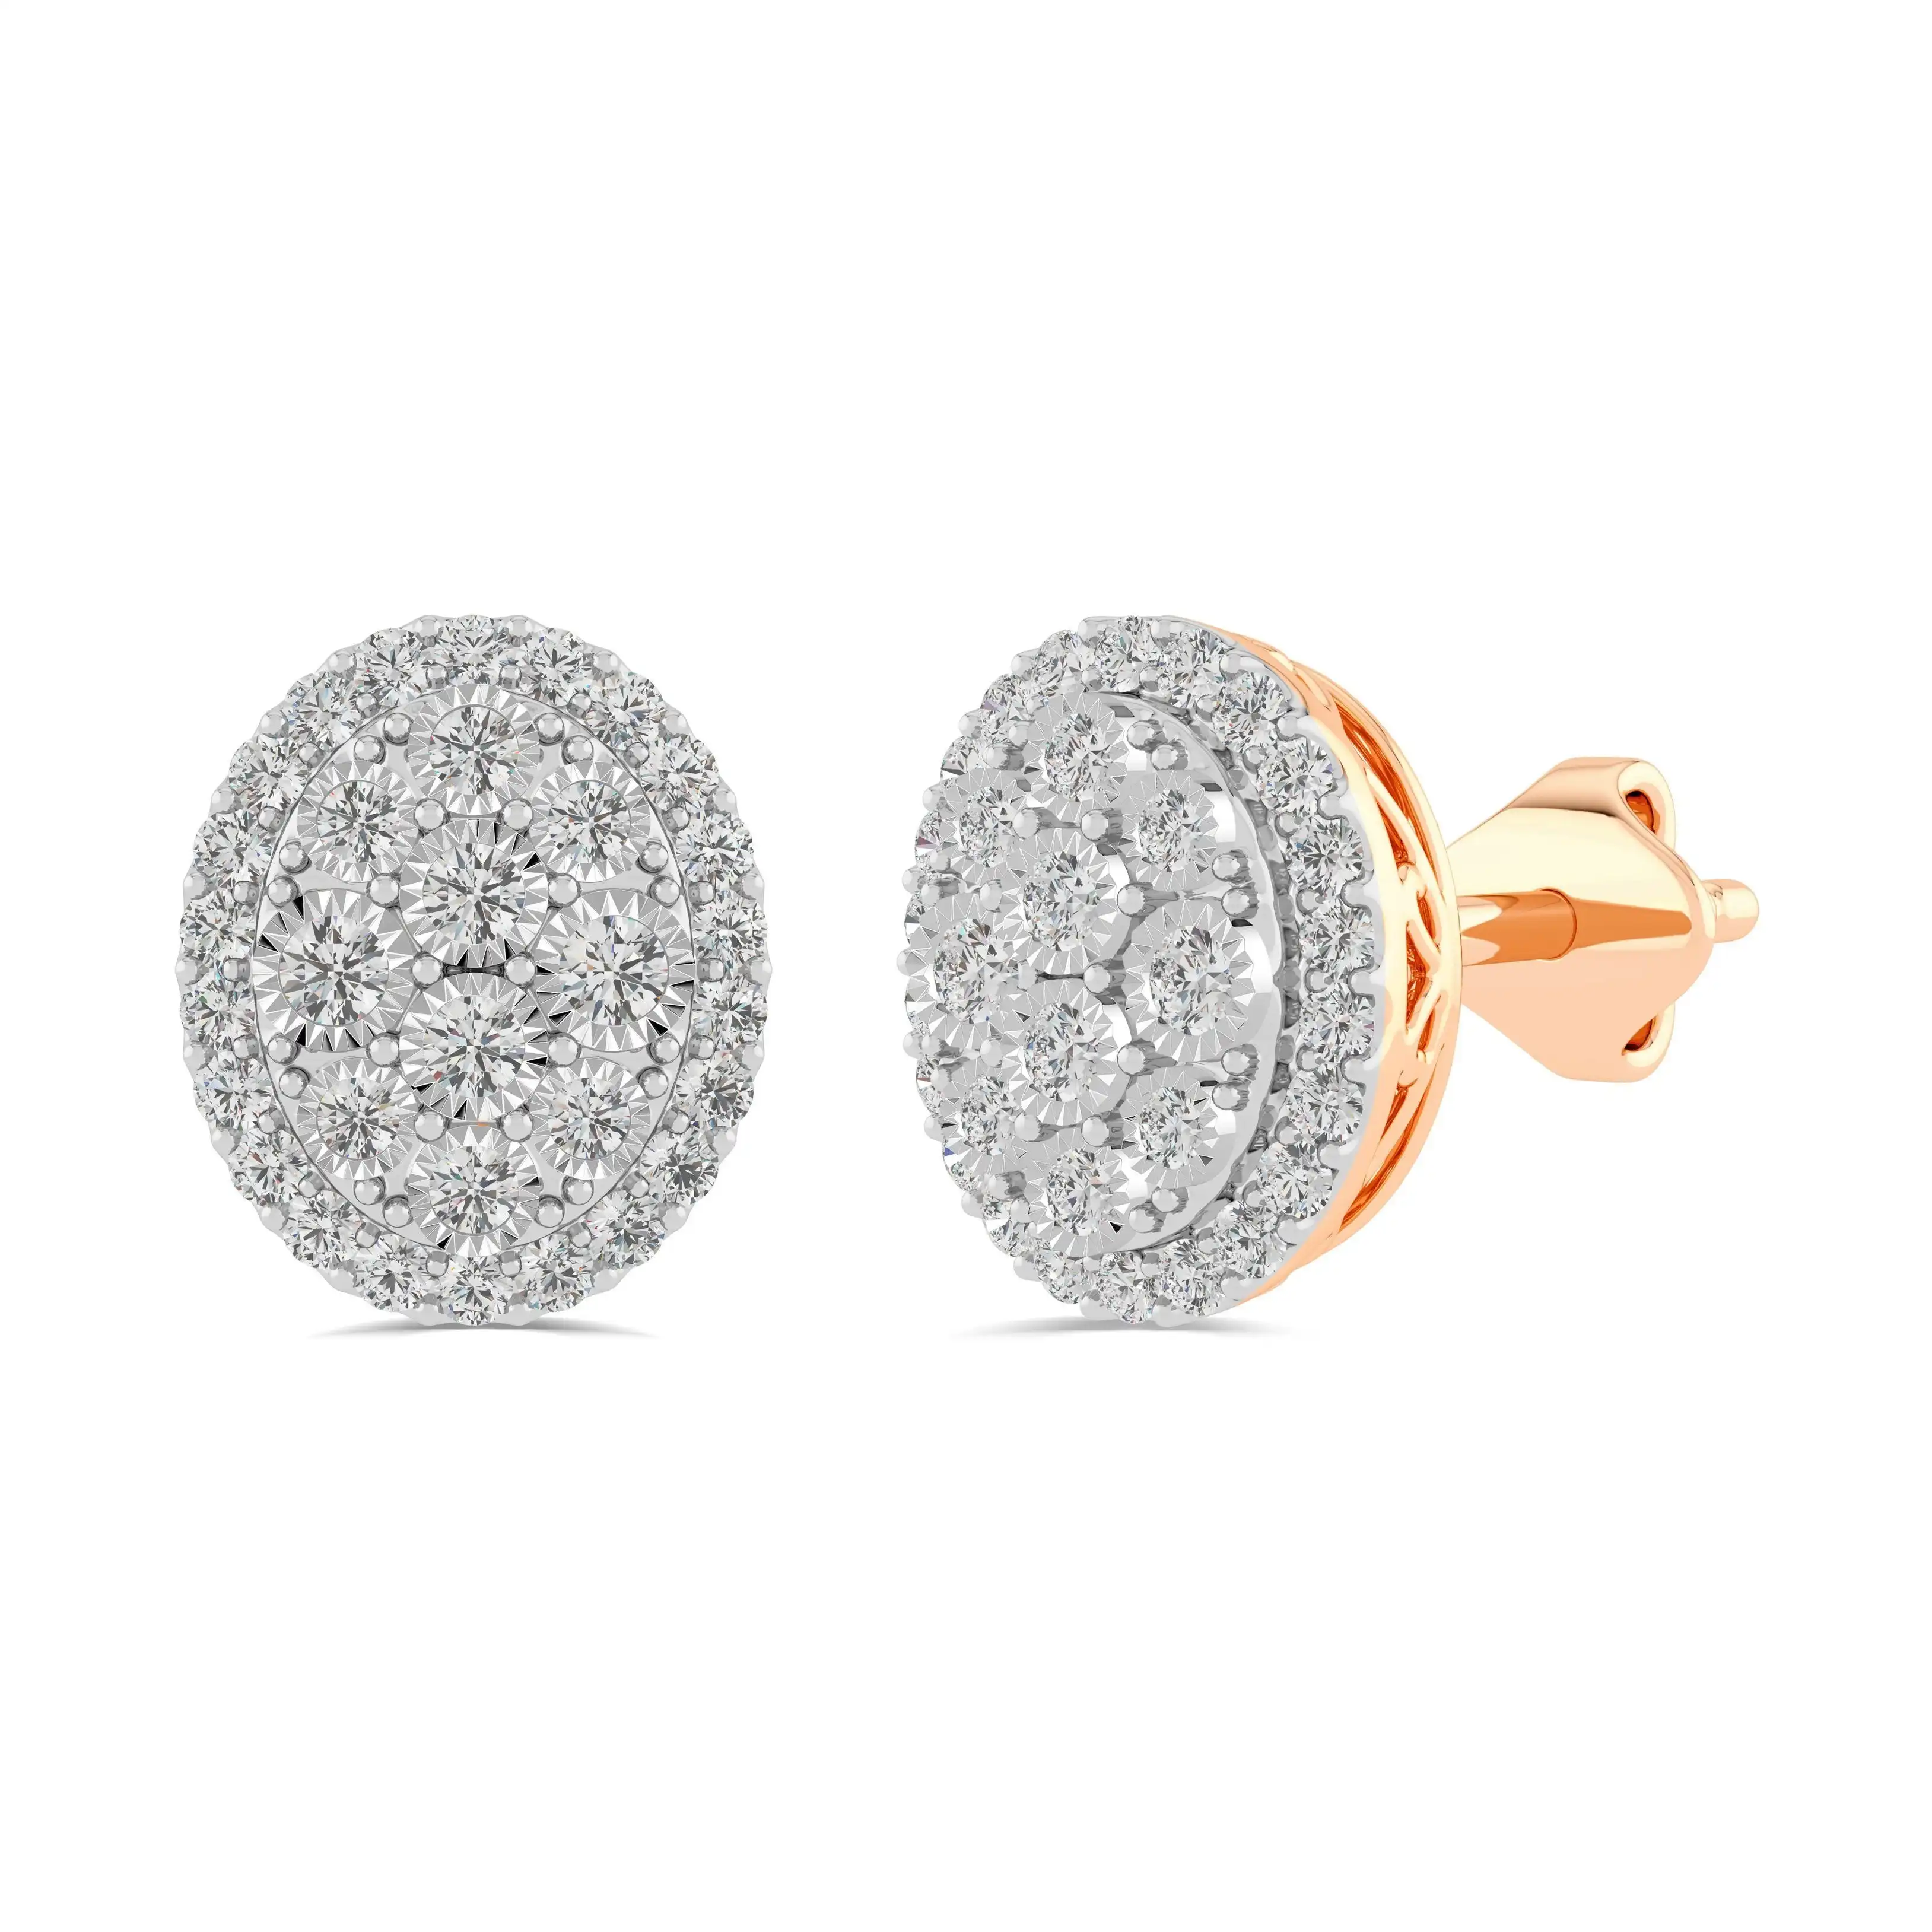 Oval Halo Stud Earrings with 3/4ct of Diamonds in 9ct Rose Gold